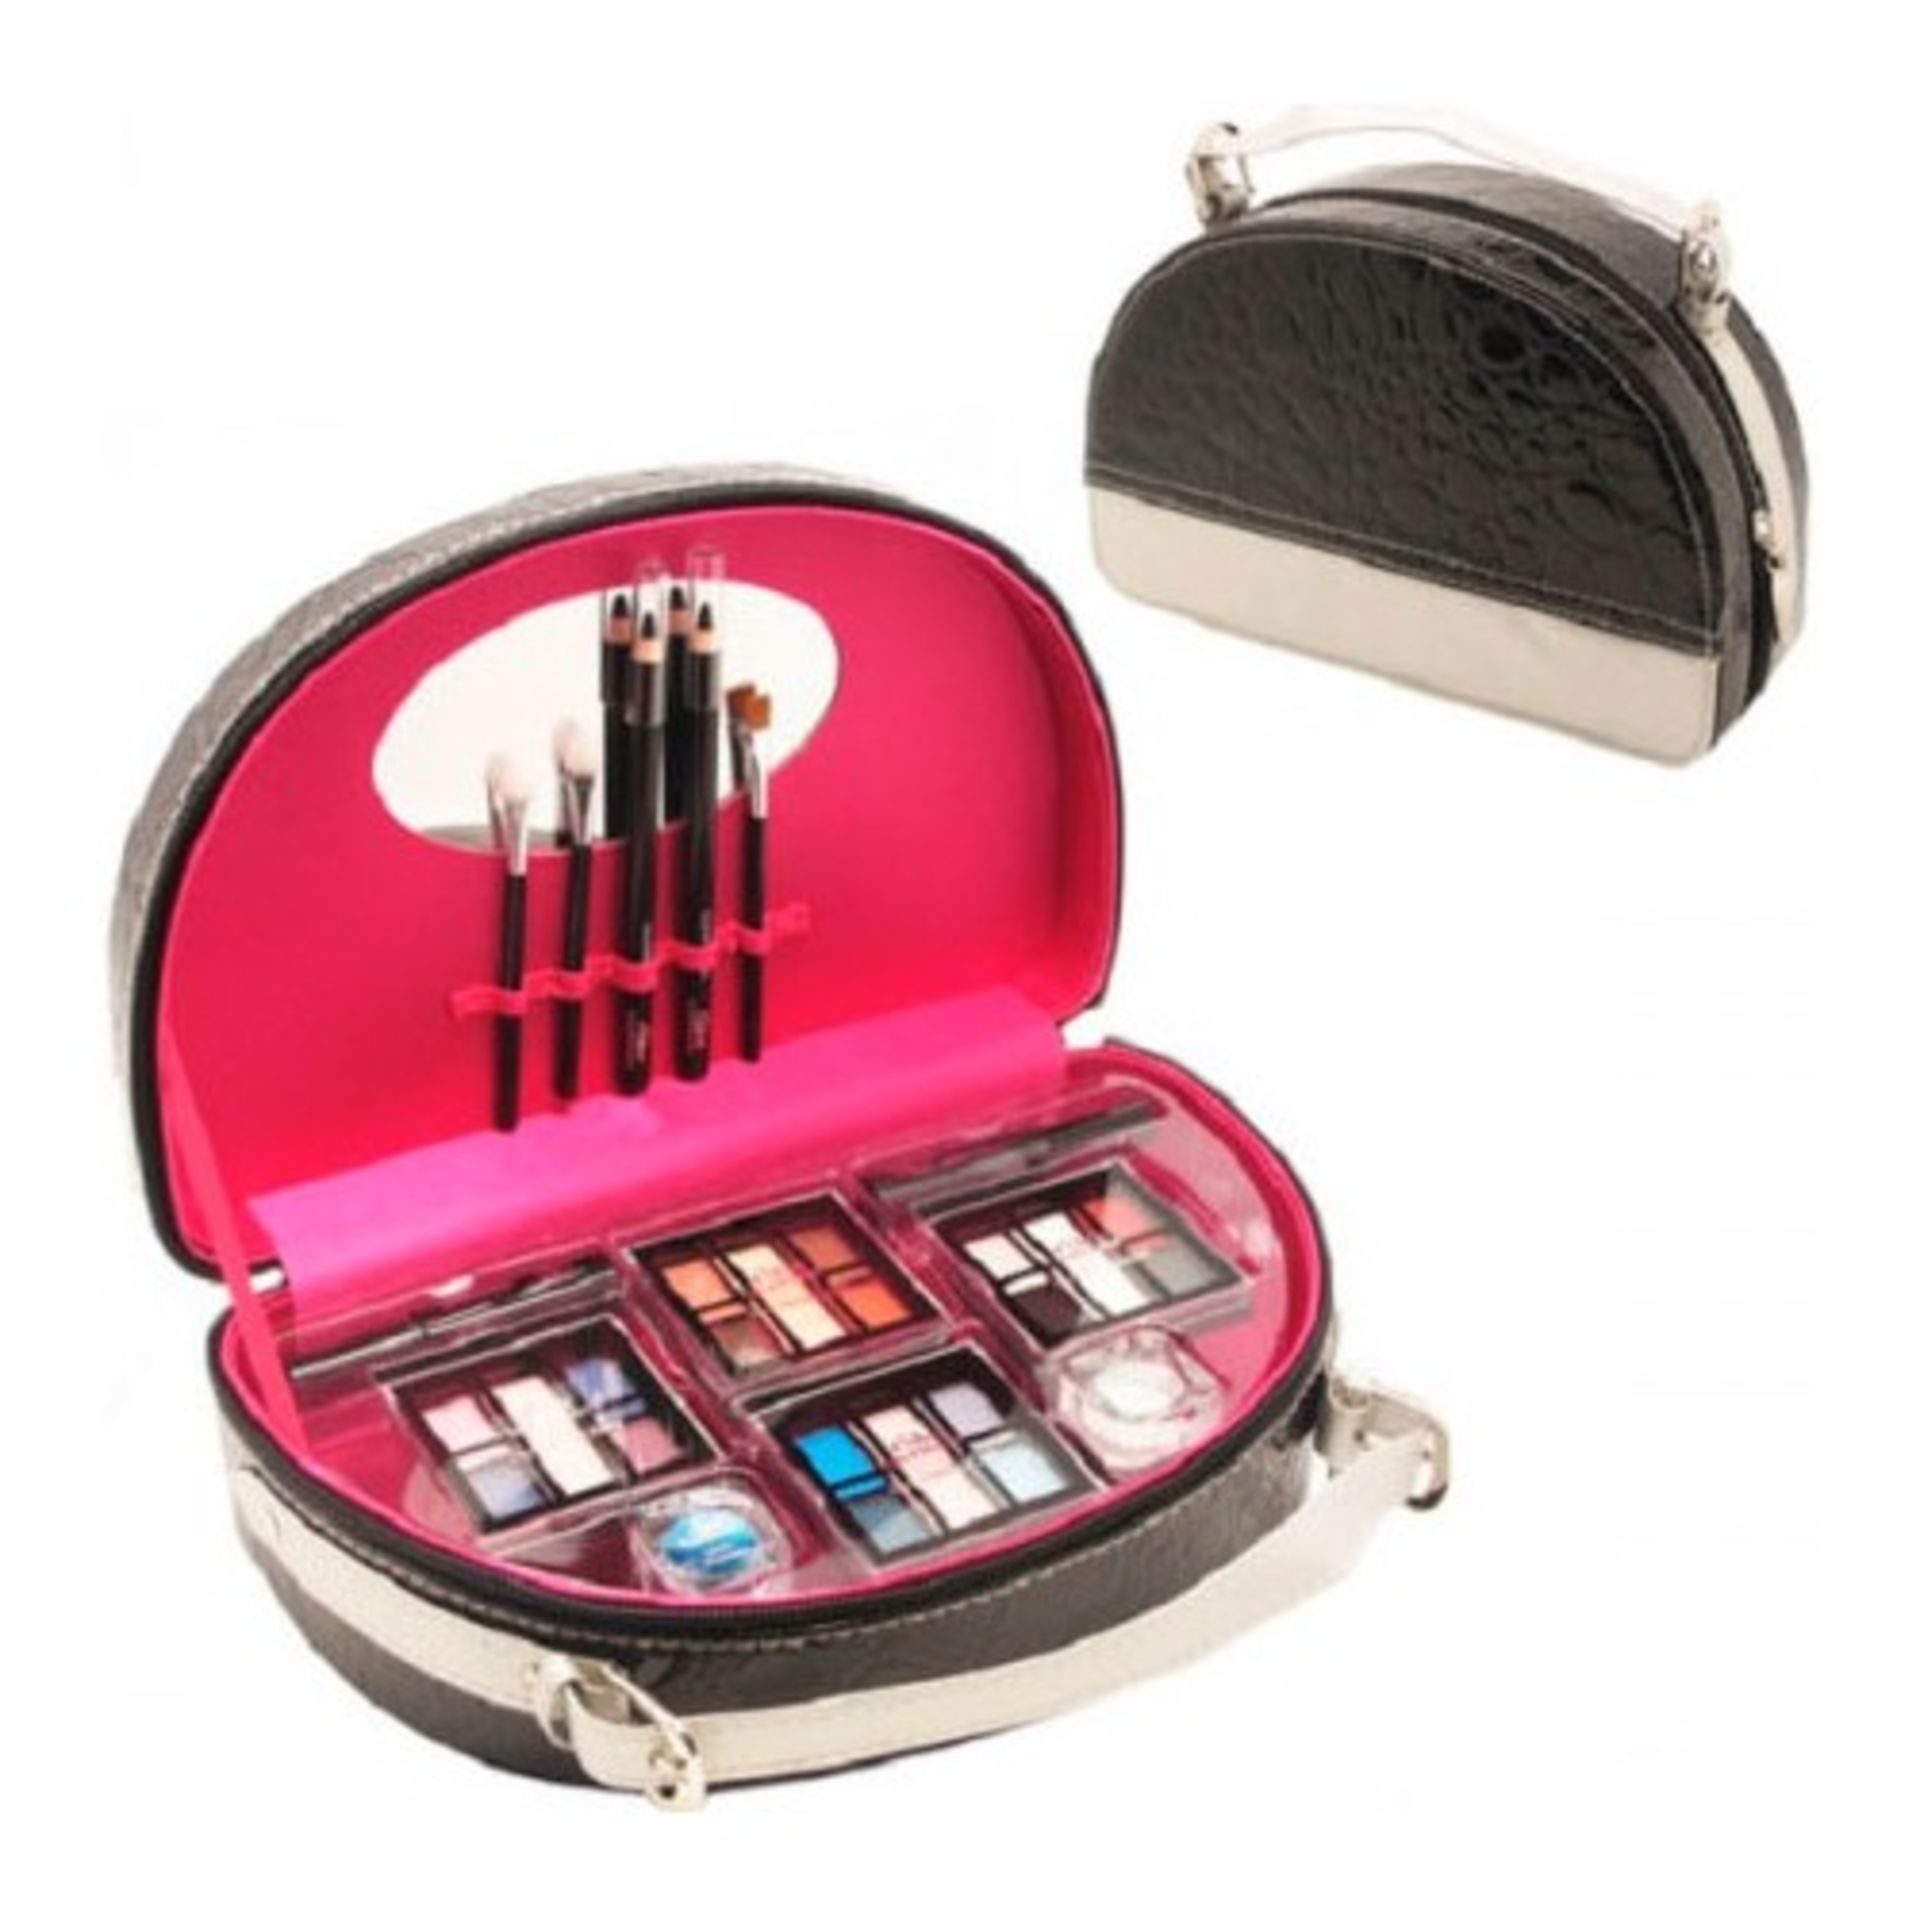 V Brand New 29 Piece Makeup Collection By The Color Institute - Includes 20 Eyeshadow Shades, 2